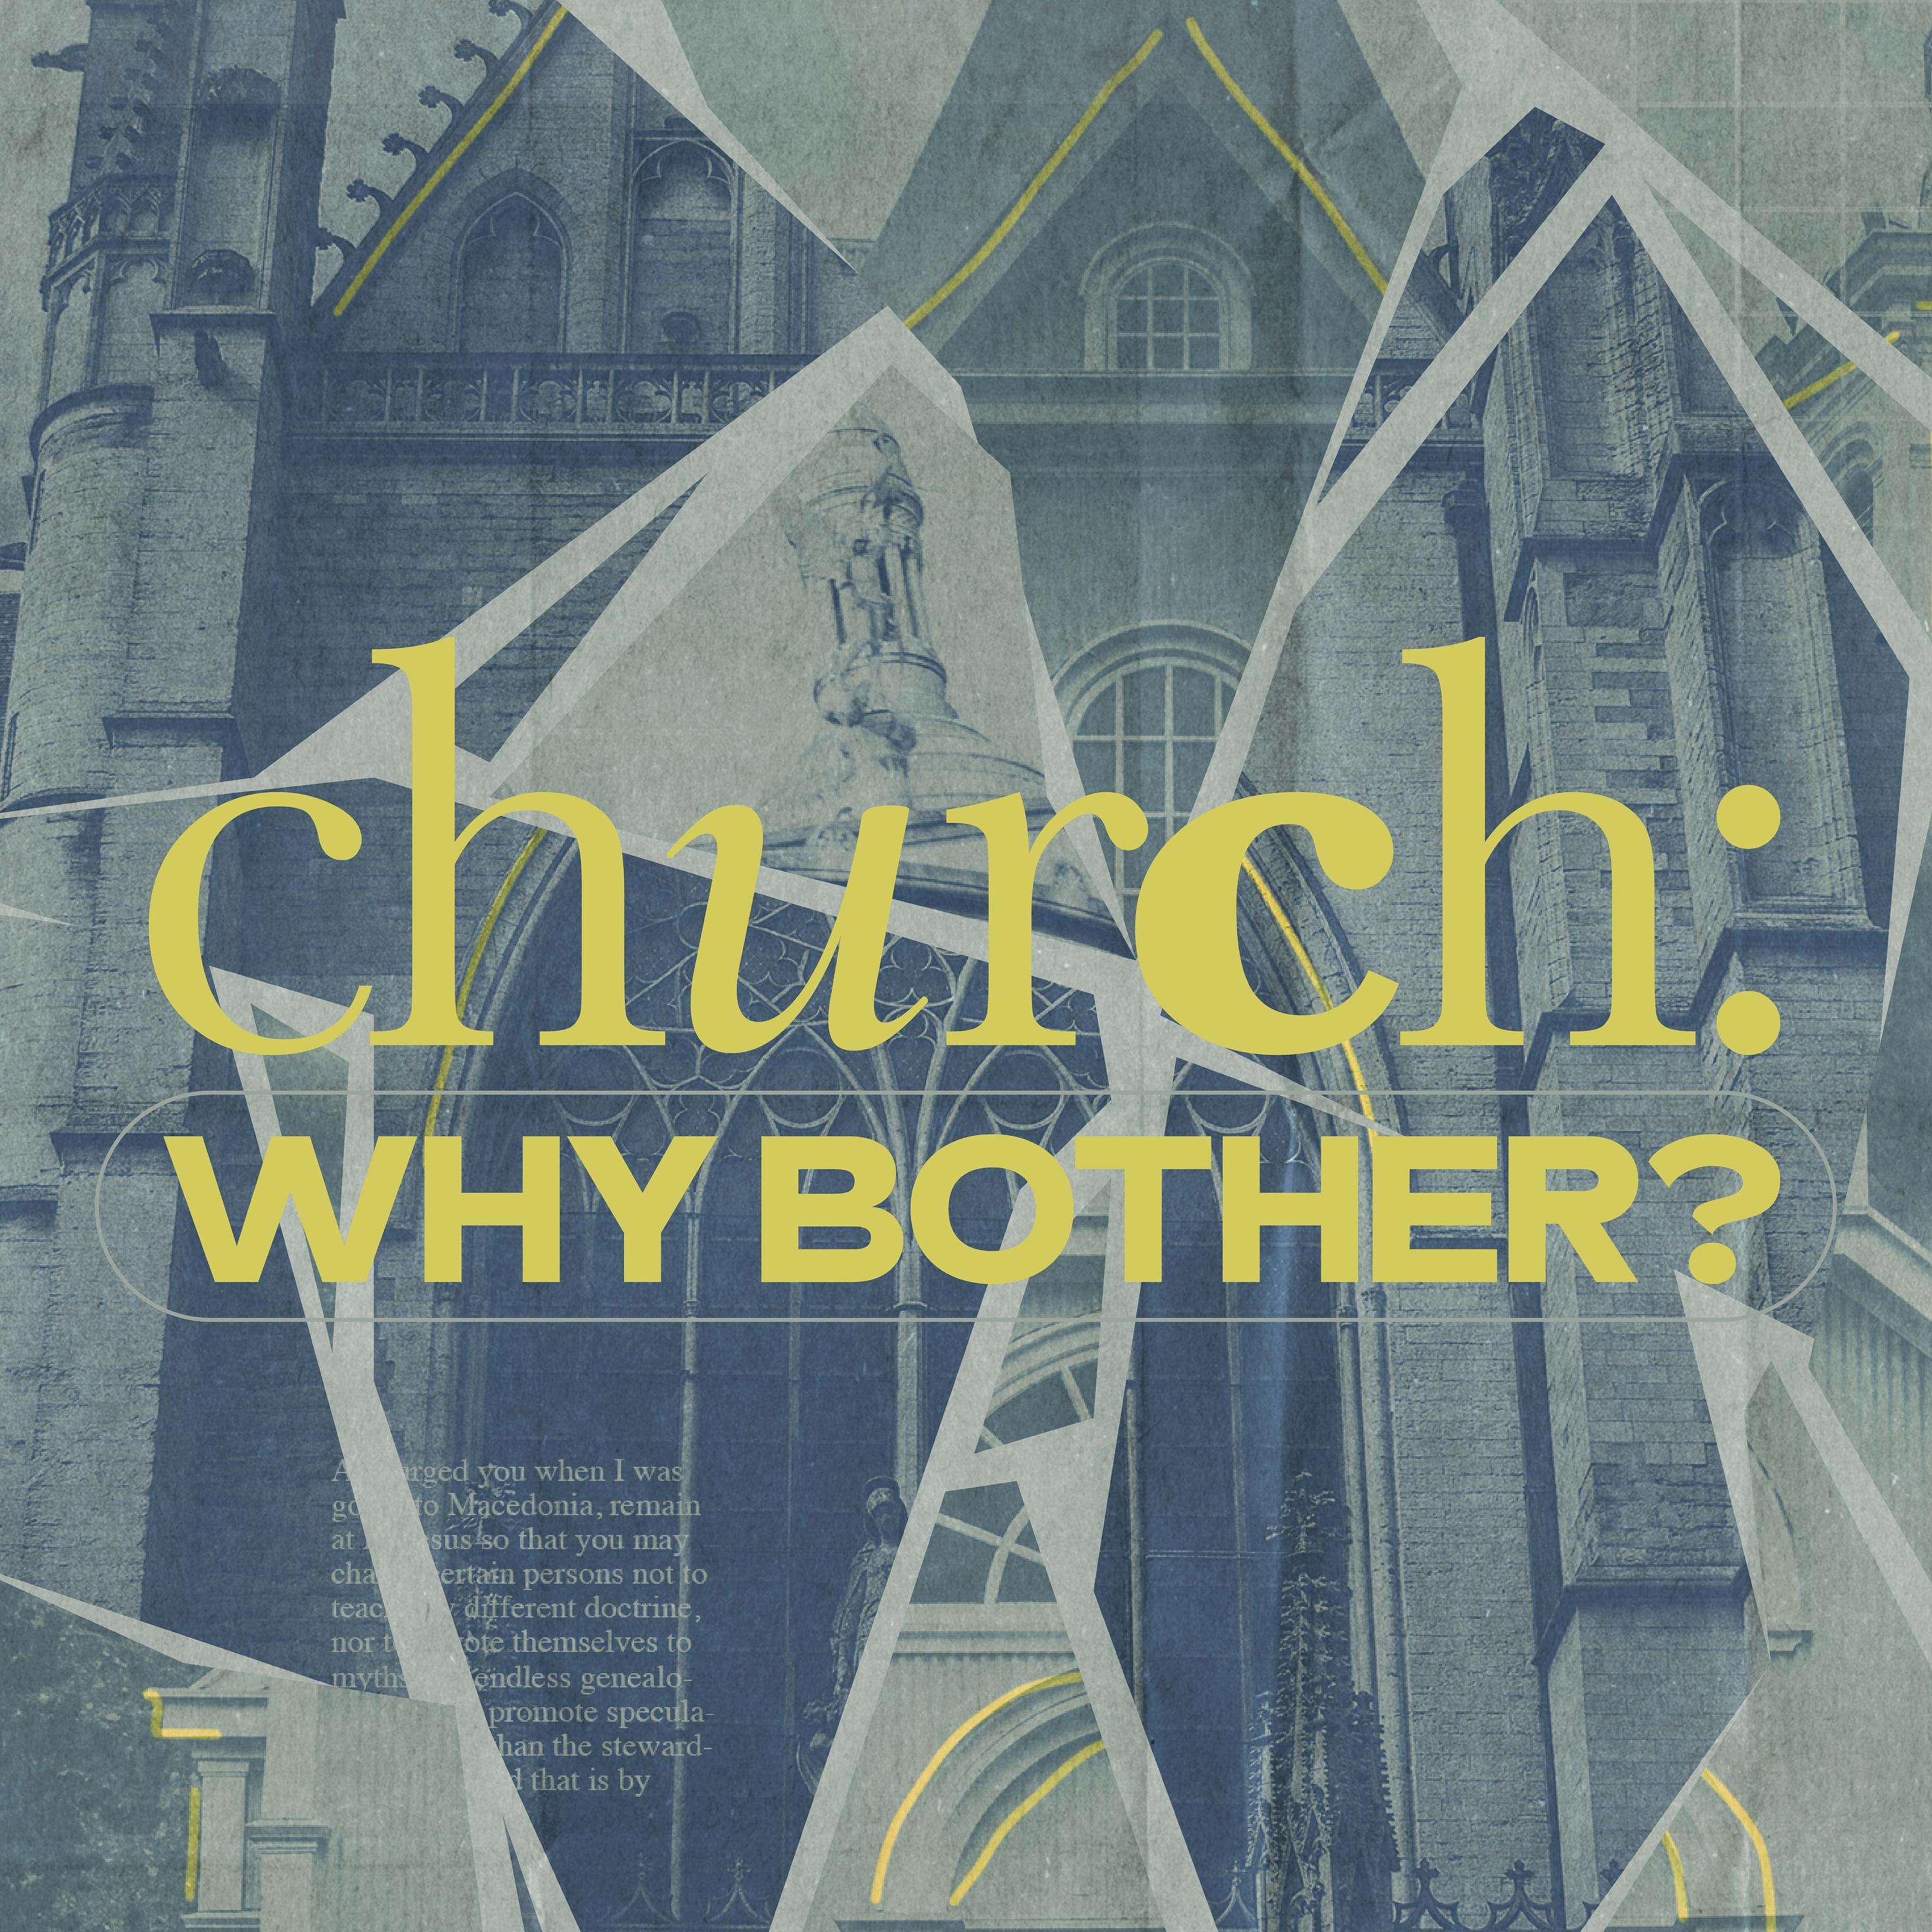 Church: Why Bother? Part 2 - Hold the Gospel!